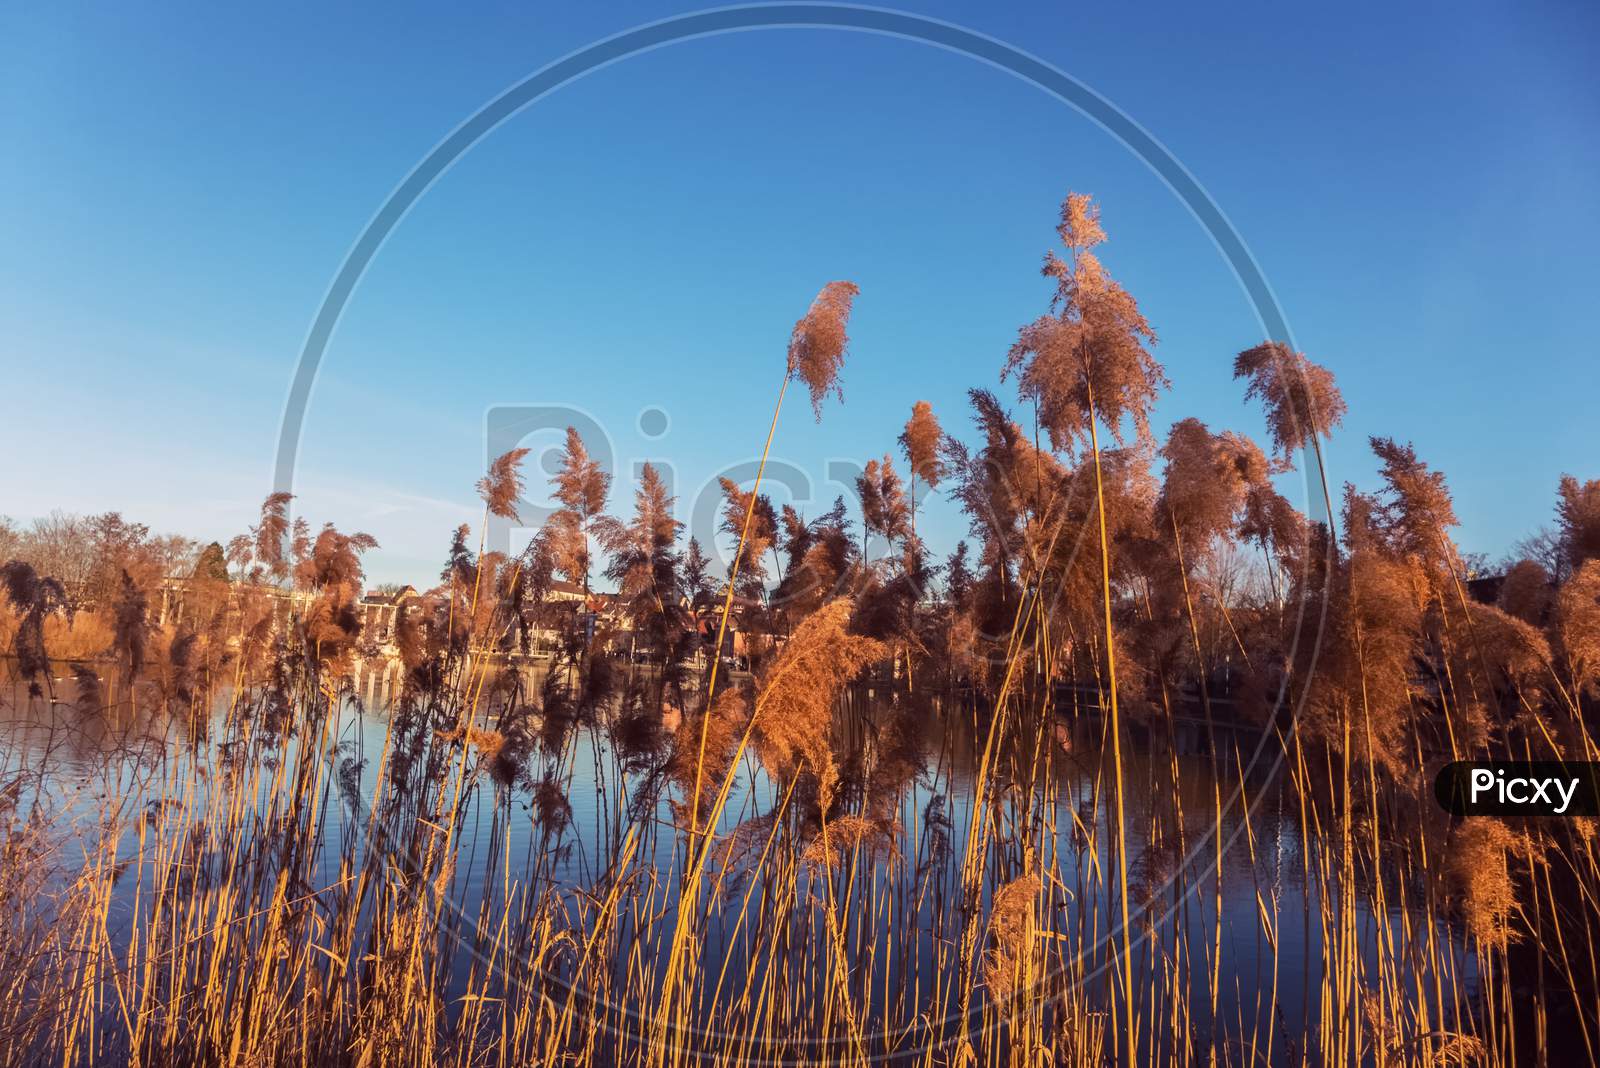 Some Plants On The Shore Of A Small Lake In A Public Park